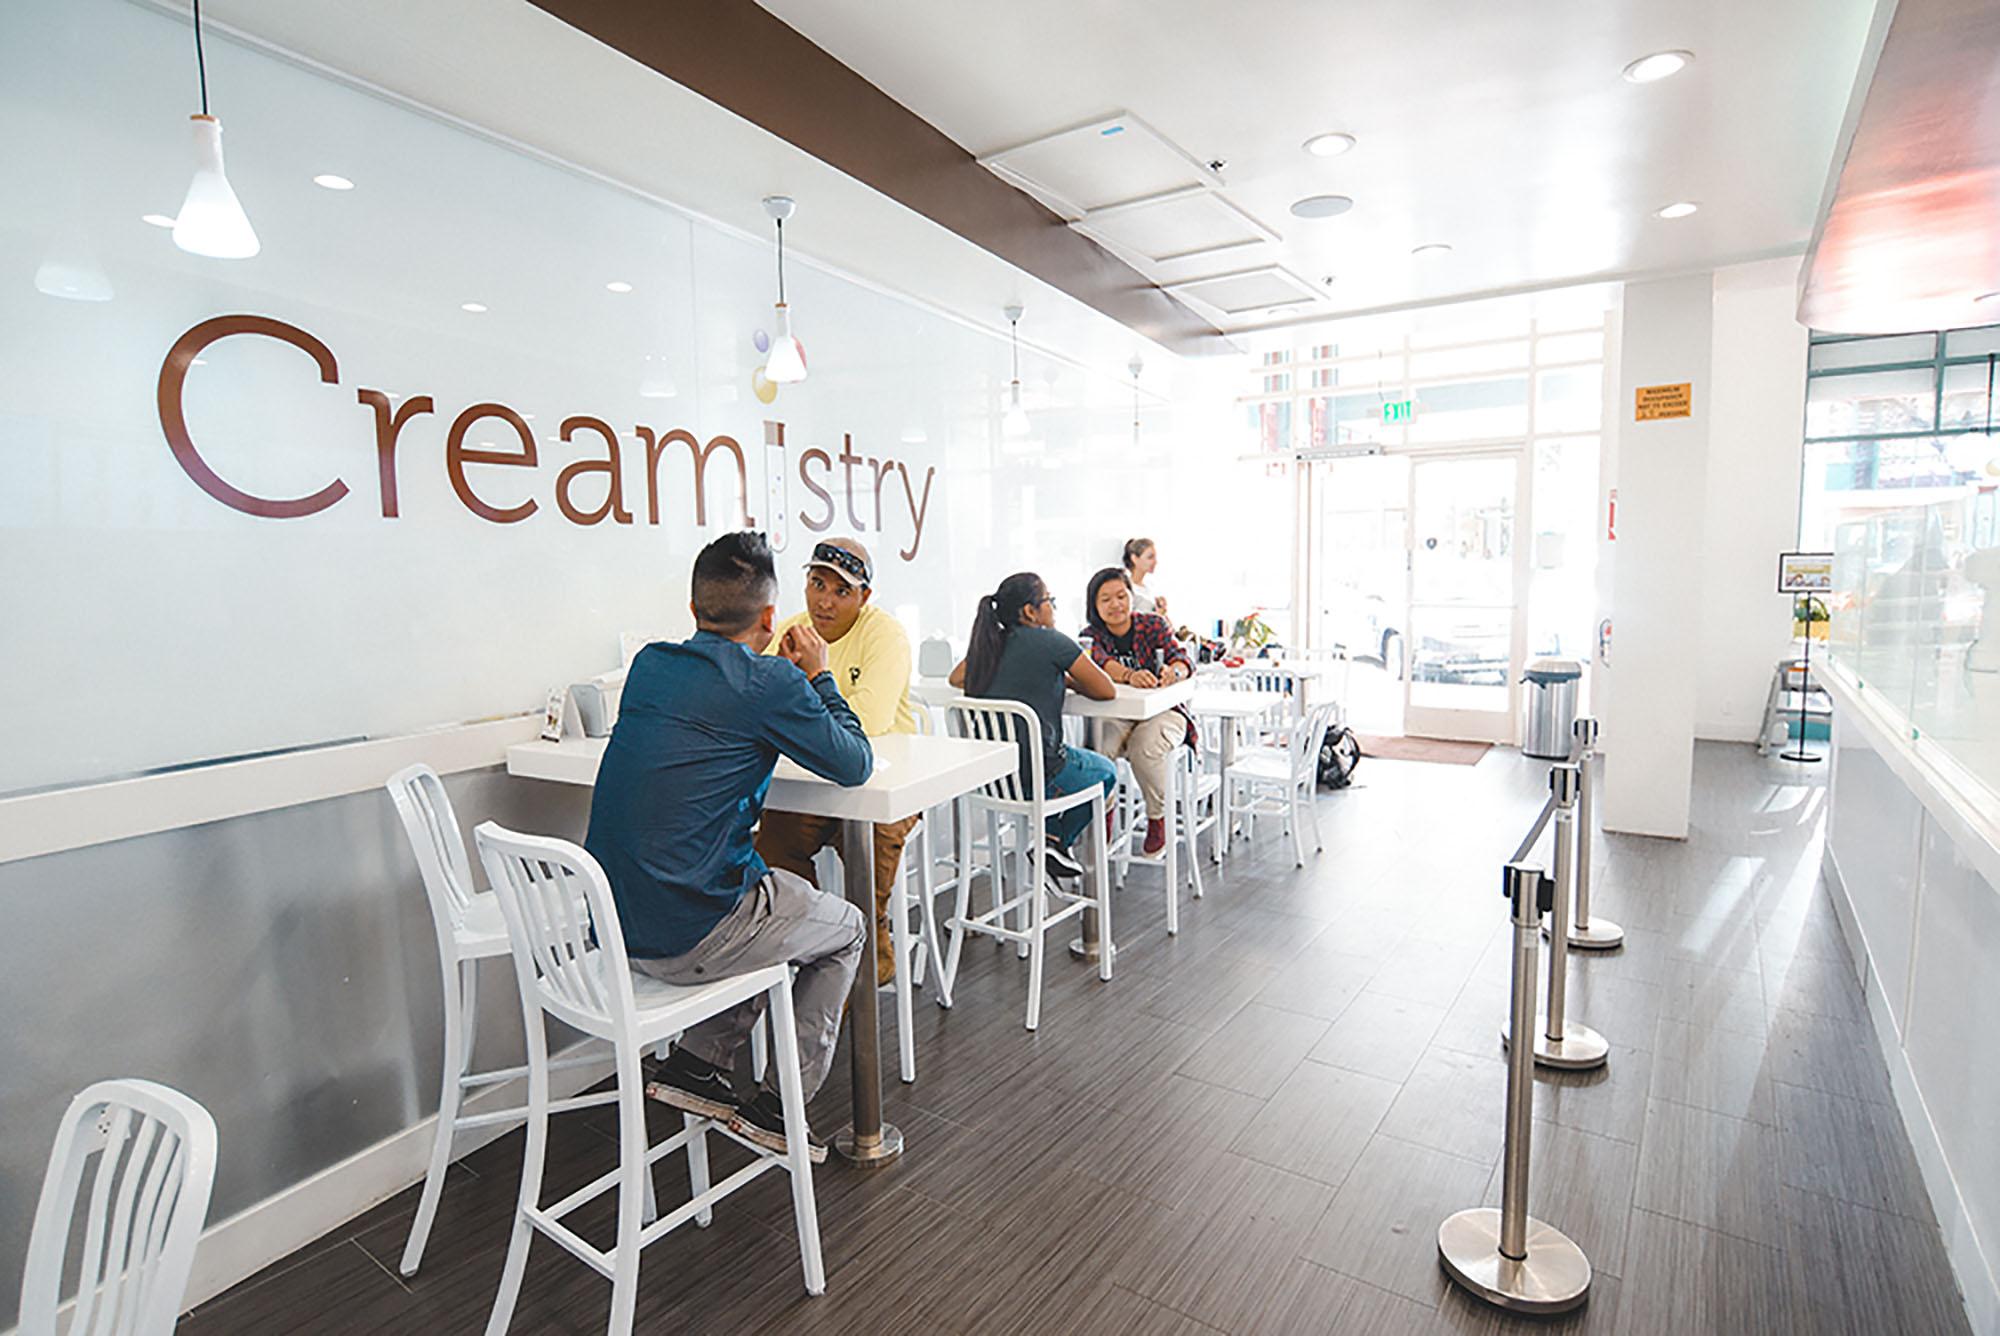 Customers enjoy their ice cream inside the Creamistry storefront